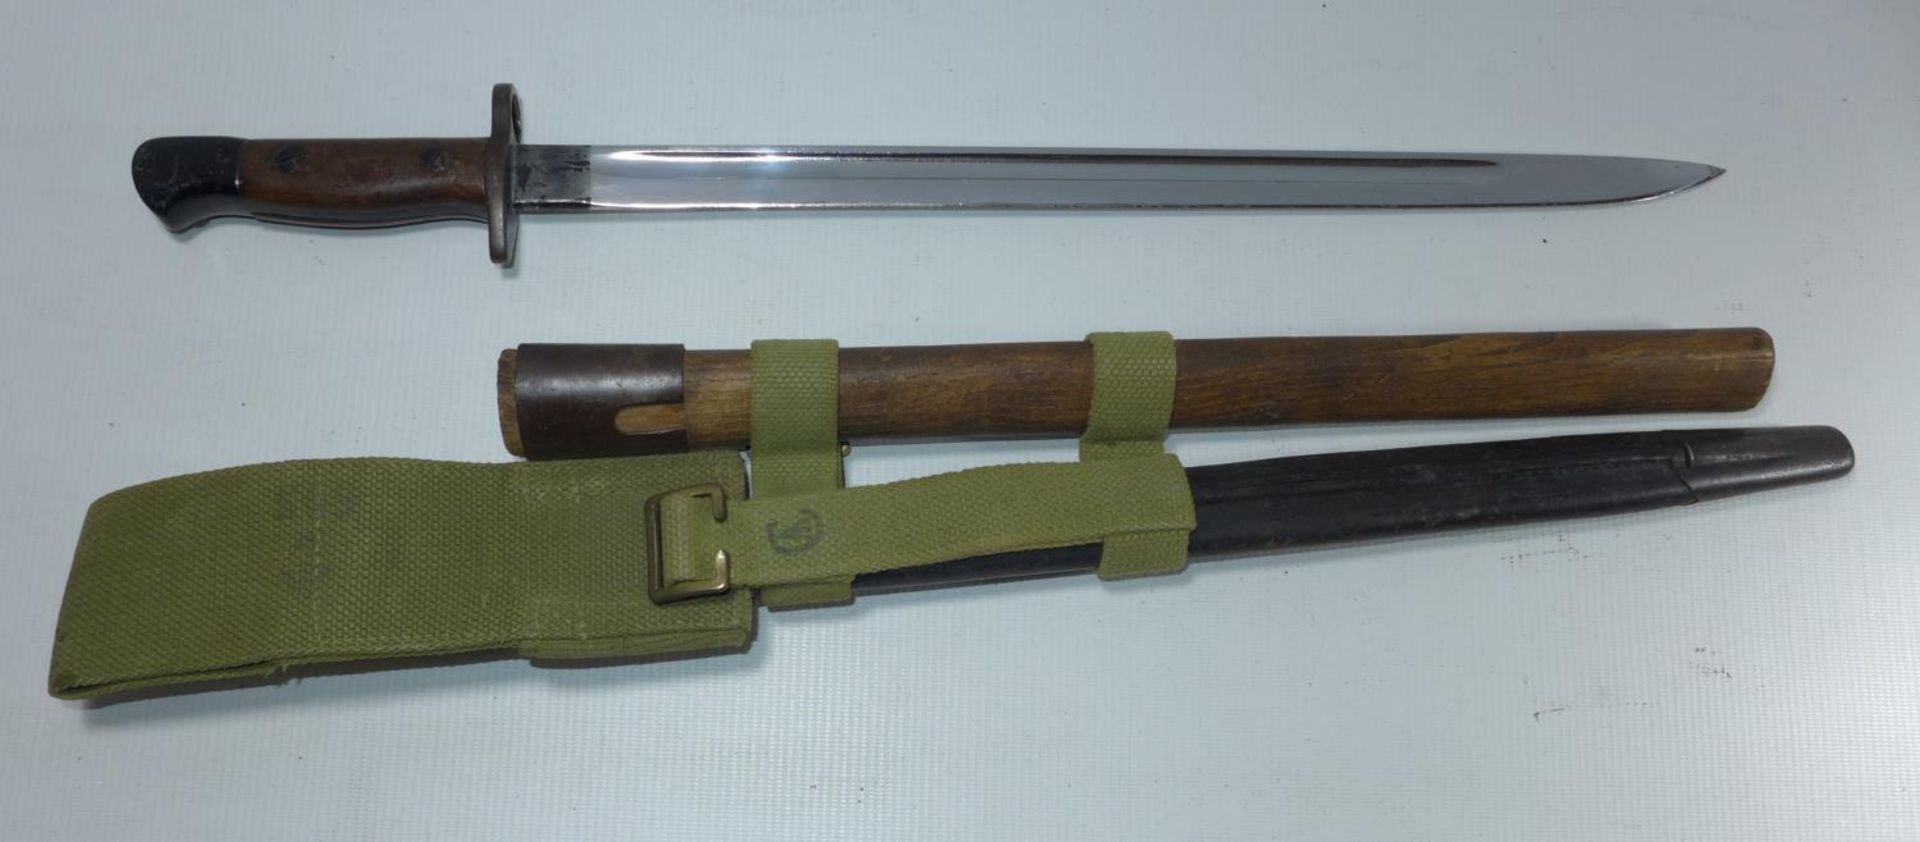 A BRITISH 1907 BAYONET AND HELVE CARRIER - Image 4 of 4